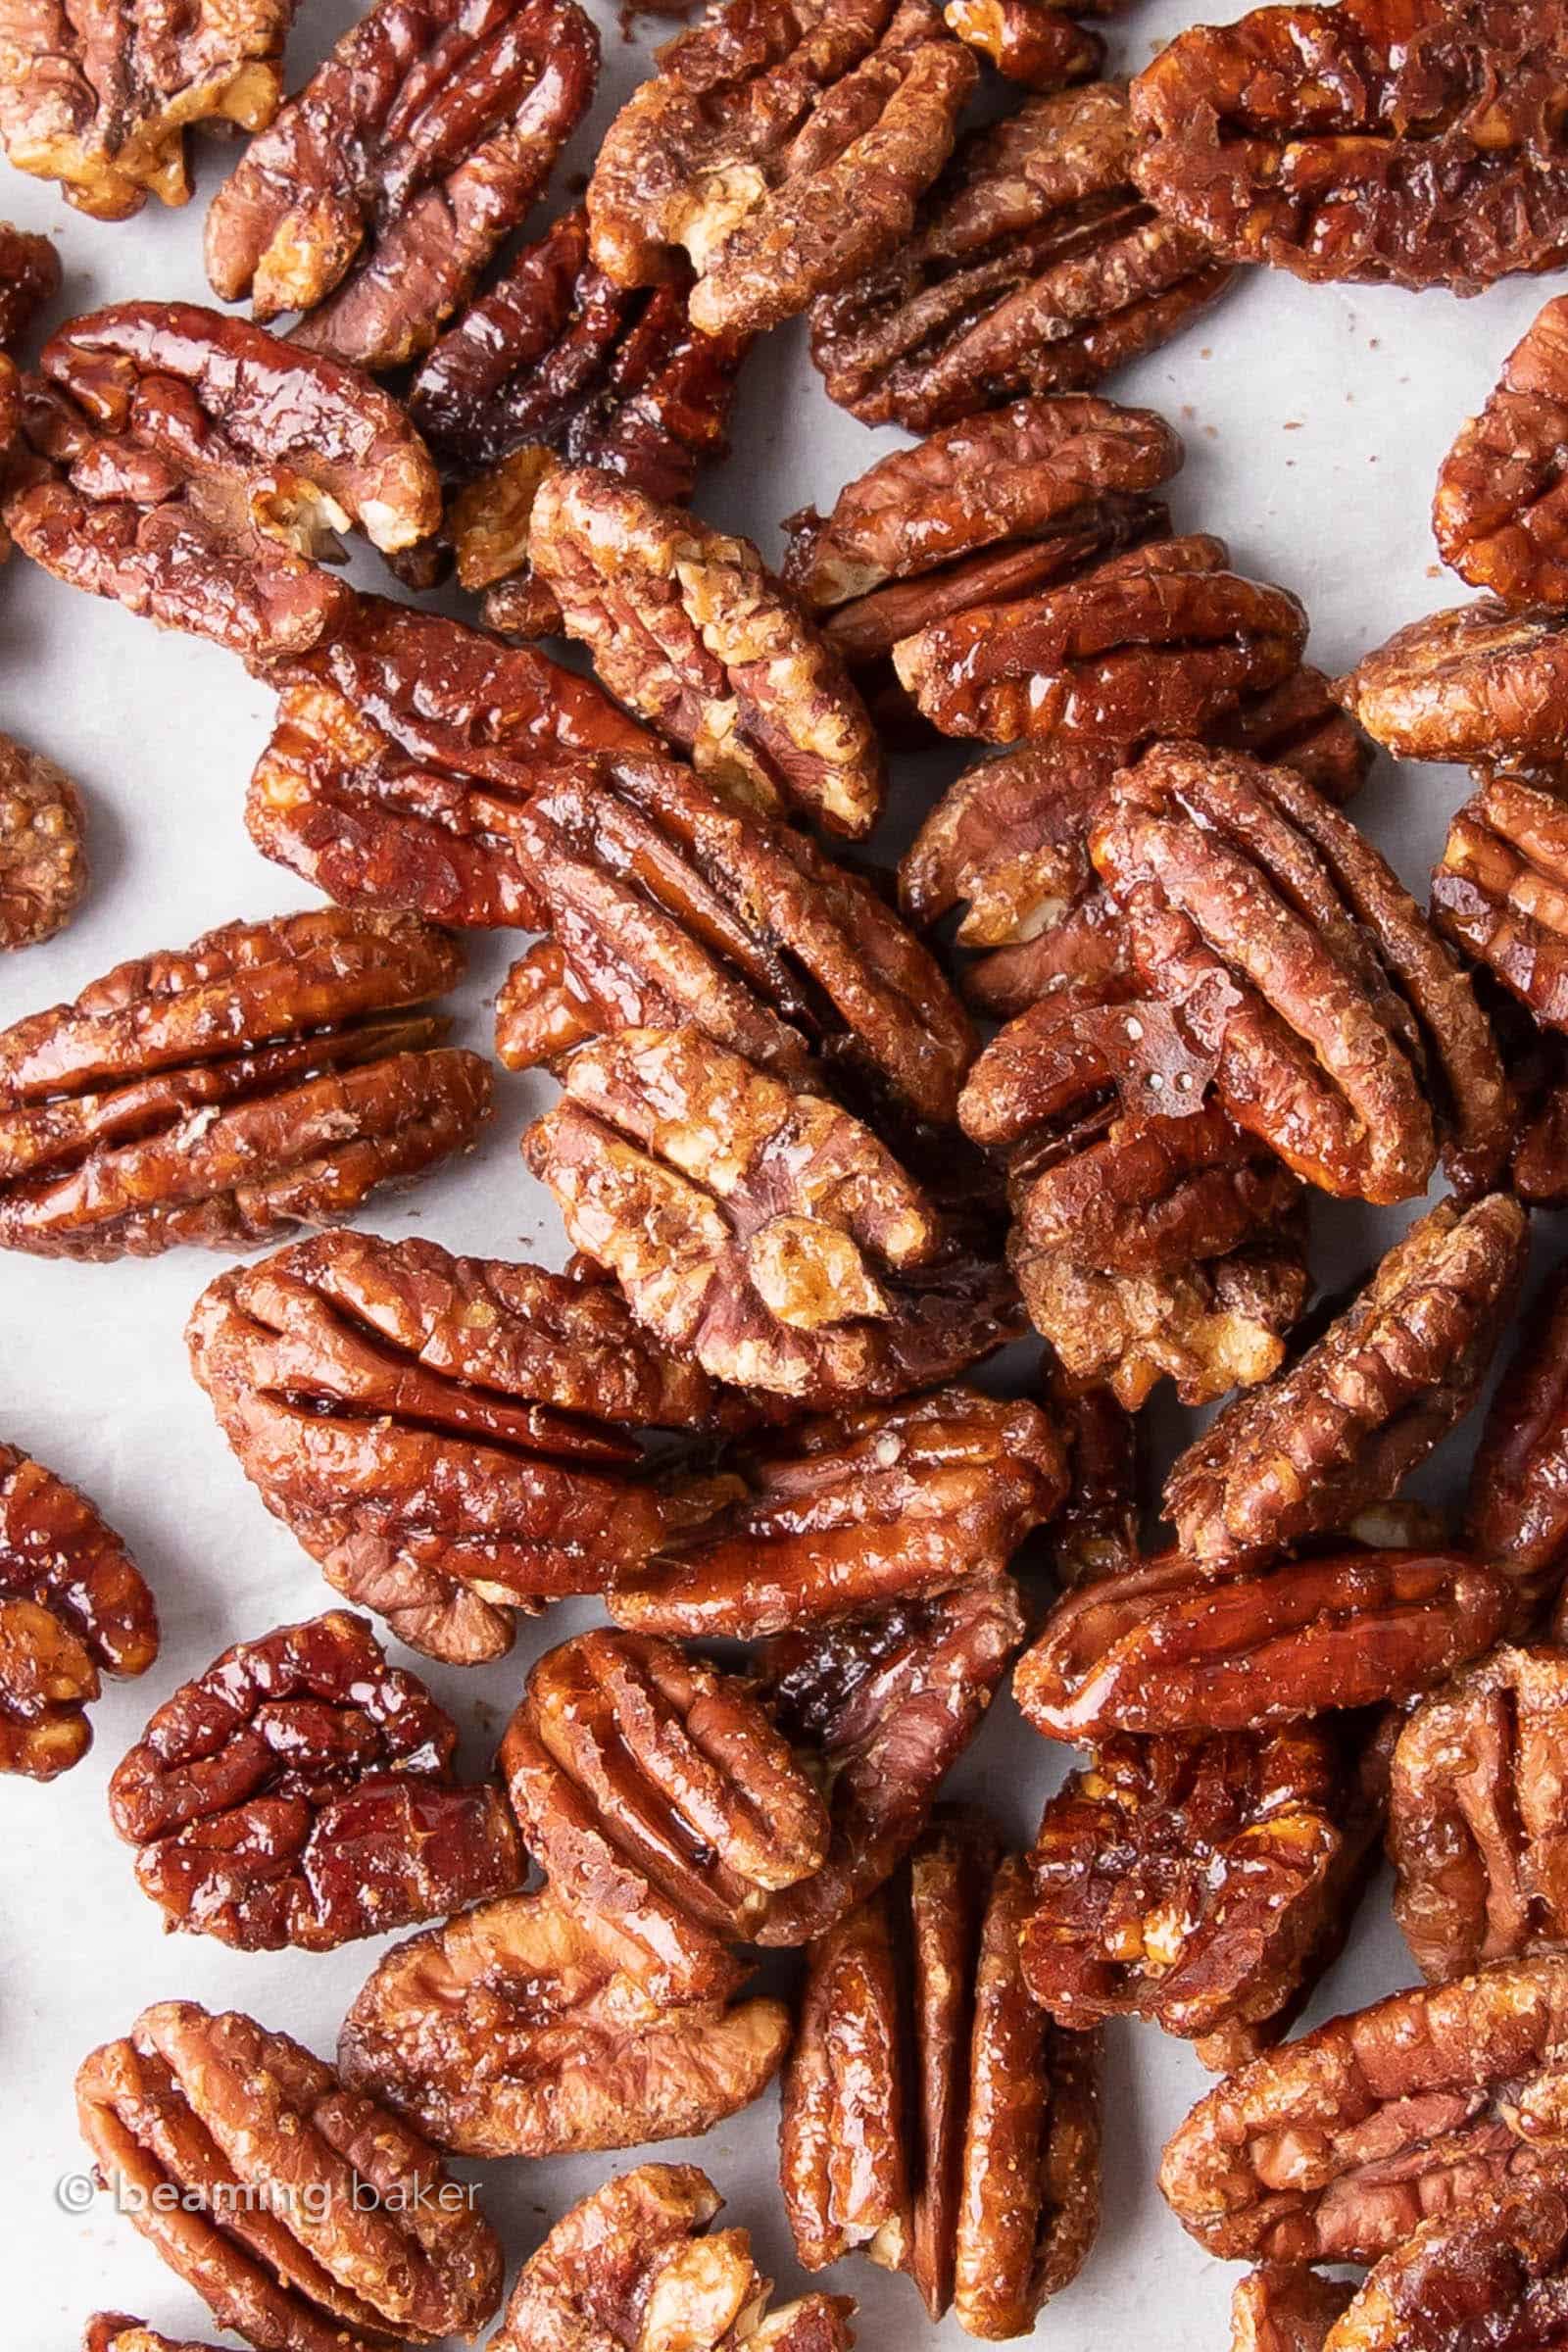 Vegan Candied Pecans: learn how to make candied pecans with just 4 healthy ingredients! Prep time is just 5 mins for deliciously glazed candied pecans in this lower sugar recipe! #Pecans #Healthy #Vegan #Fall | Recipe at BeamingBaker.com